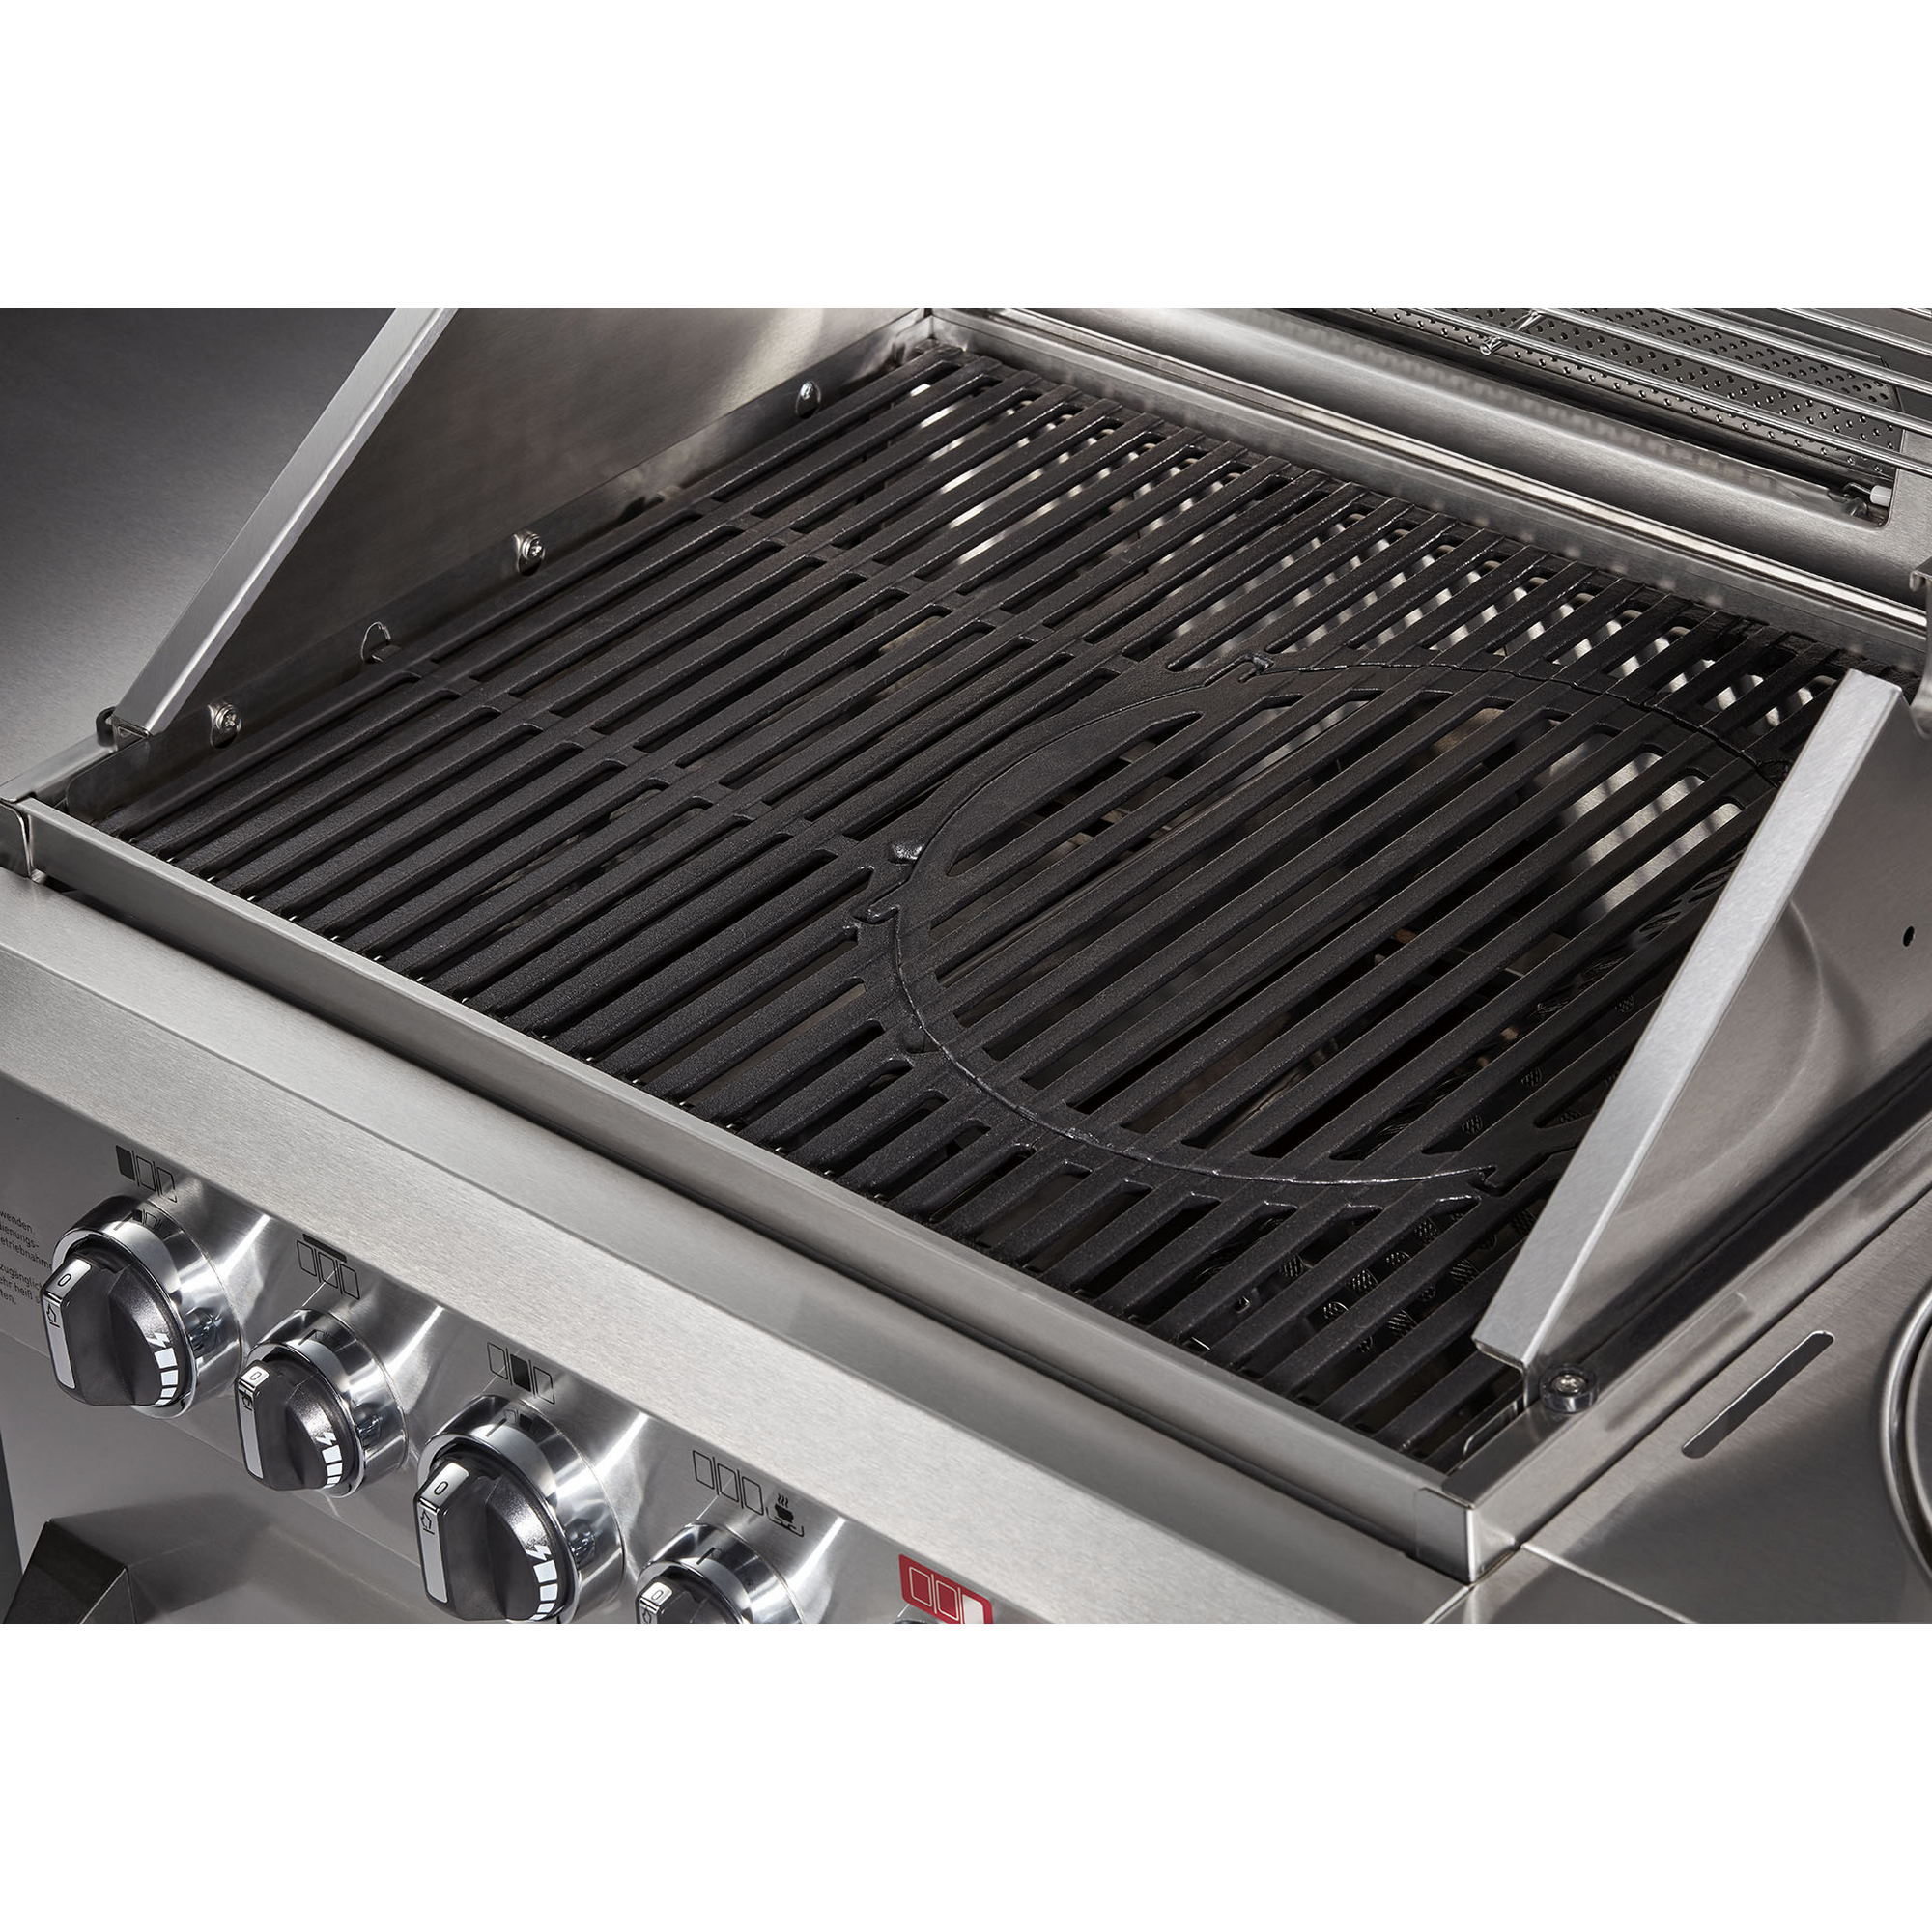 Gasgrill 'Kansas II Pro 3 SIK Turbo' 3 Brenner 142 x 64 x 118 cm + product picture